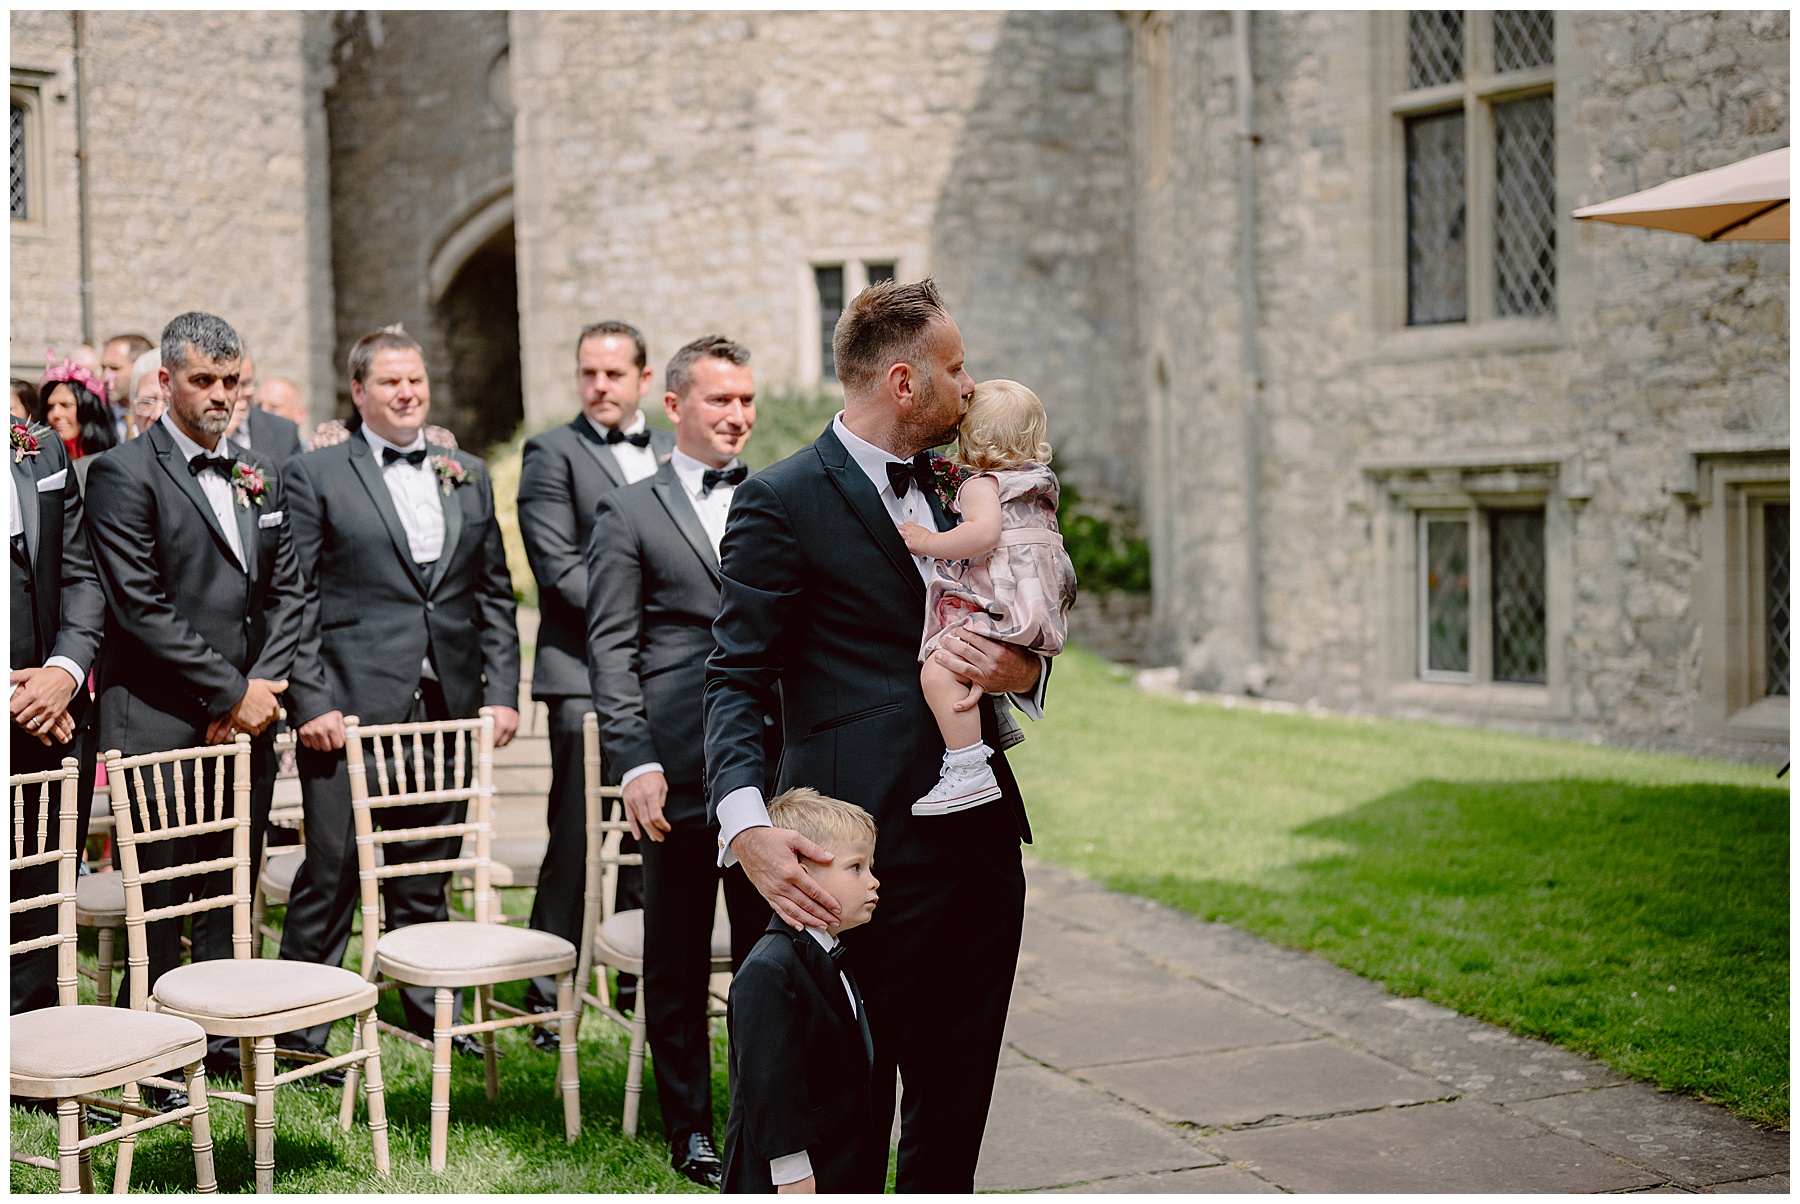 Groom and Children at Wedding